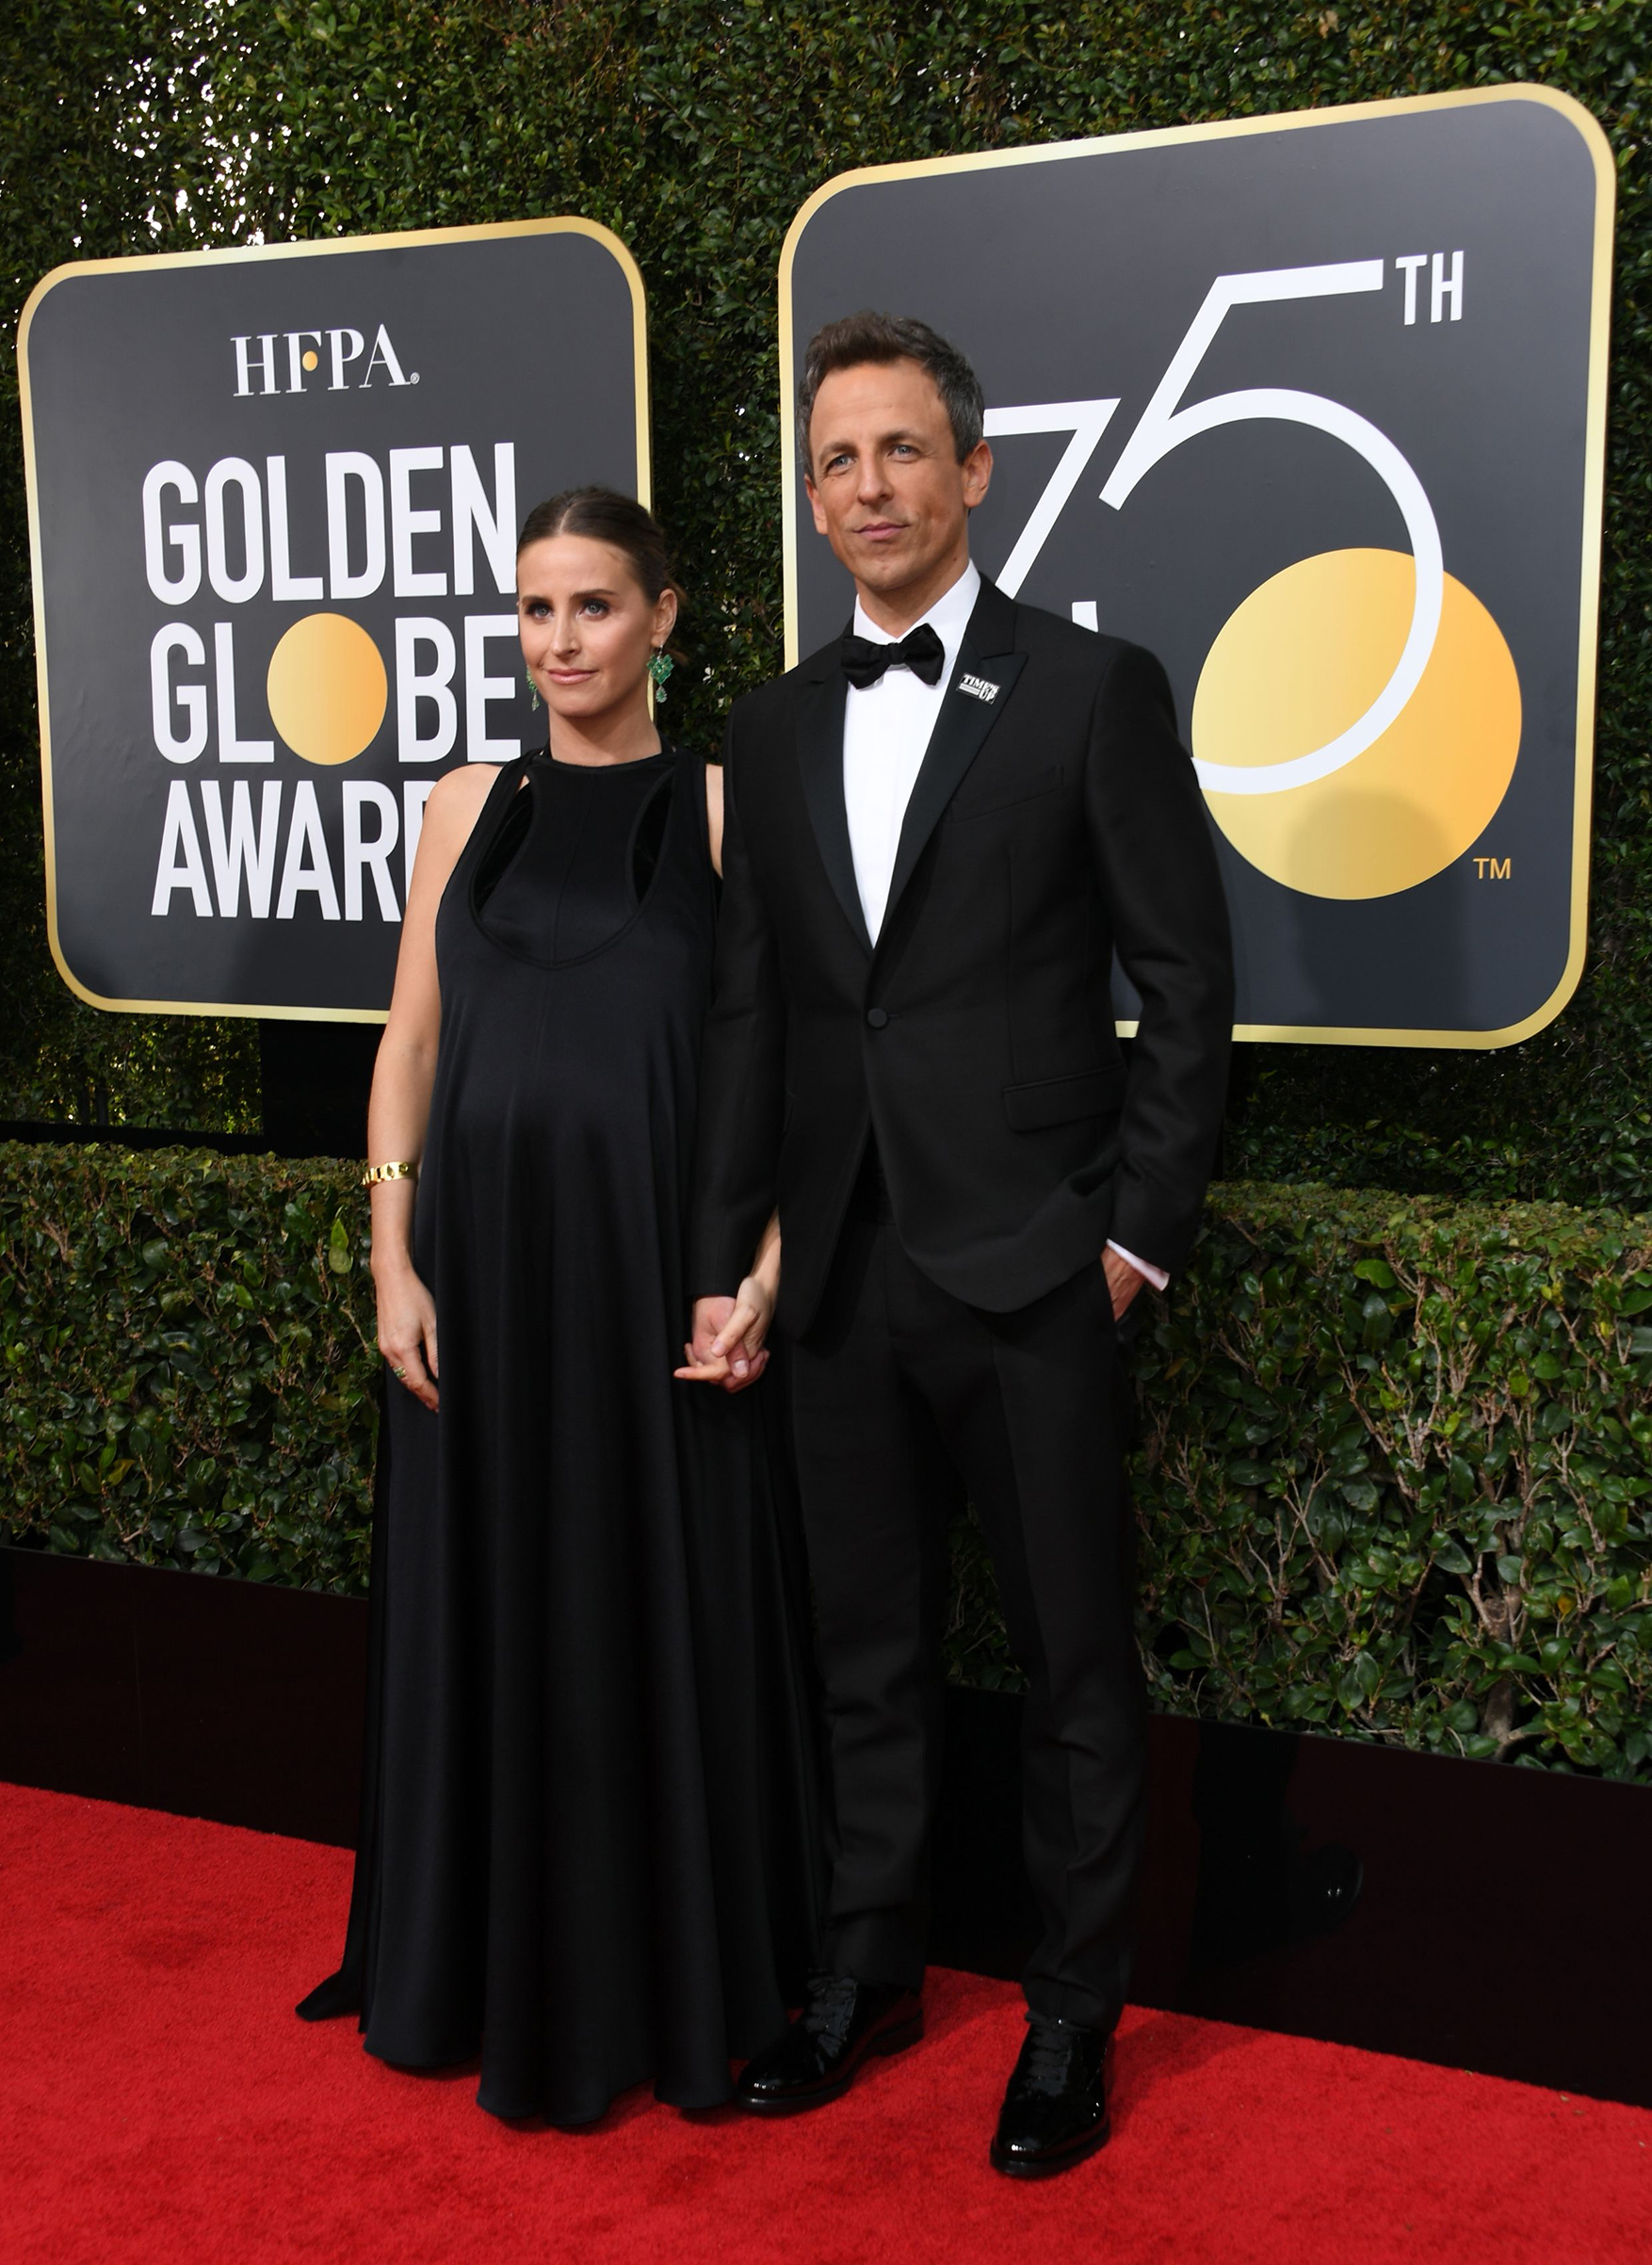 Seth Meyers and Alexi Ashe arrive for the 75th Golden Globe Awards on January 7, 2018, in Beverly Hills, California.